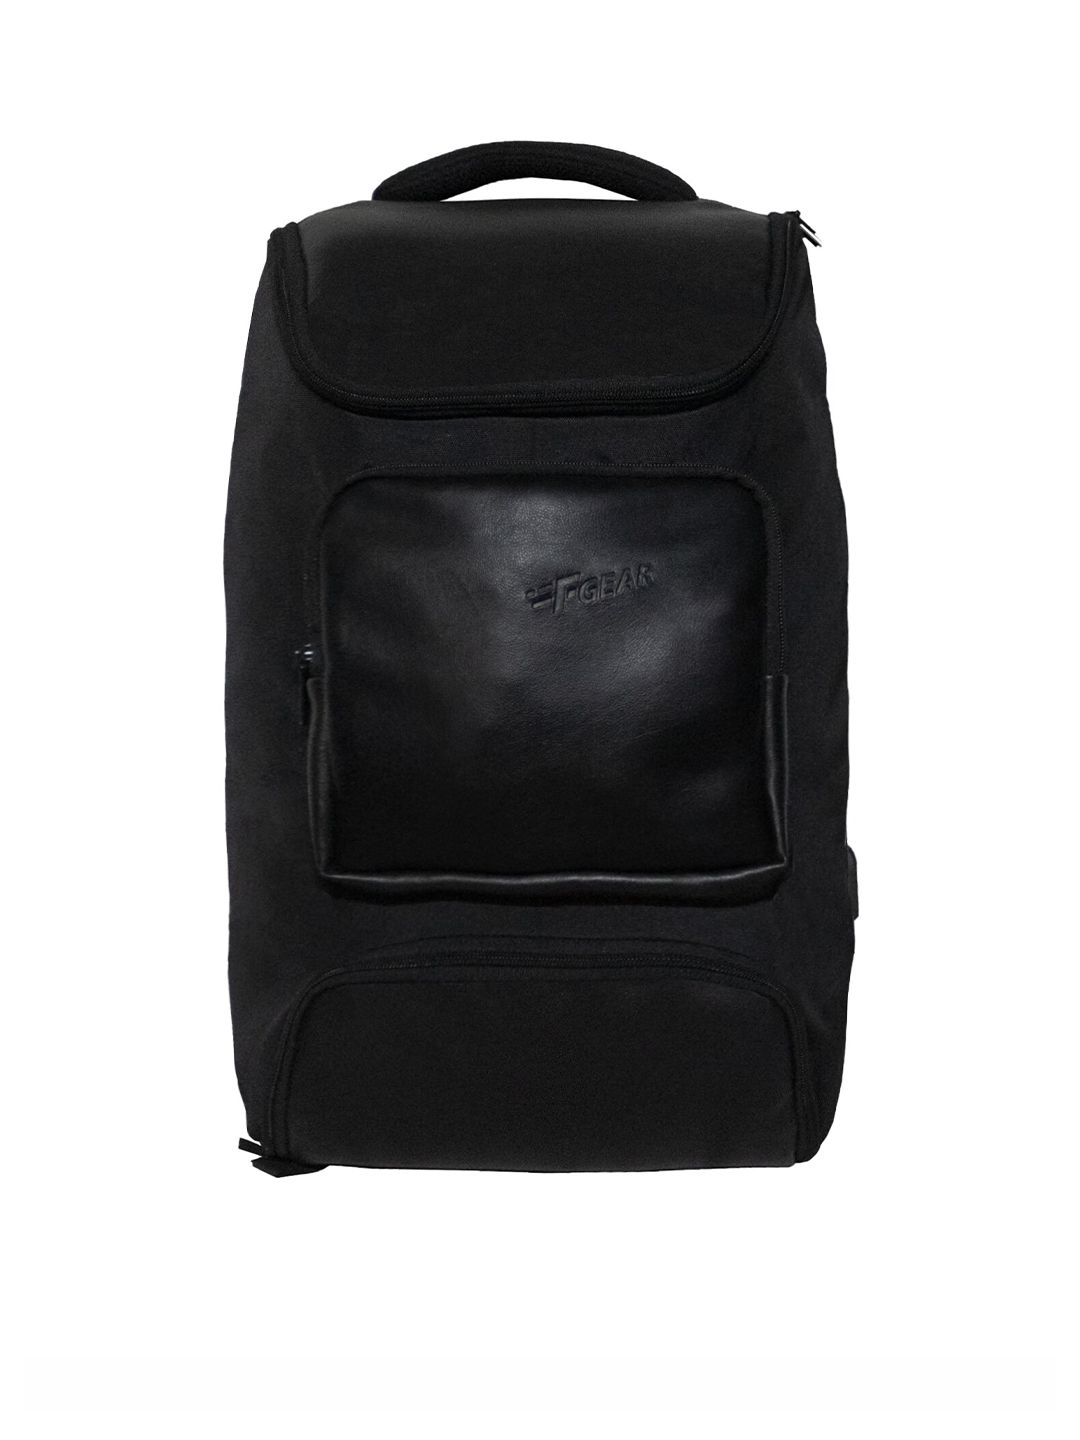 F Gear Unisex Black Backpack with USB Charging Port Price in India